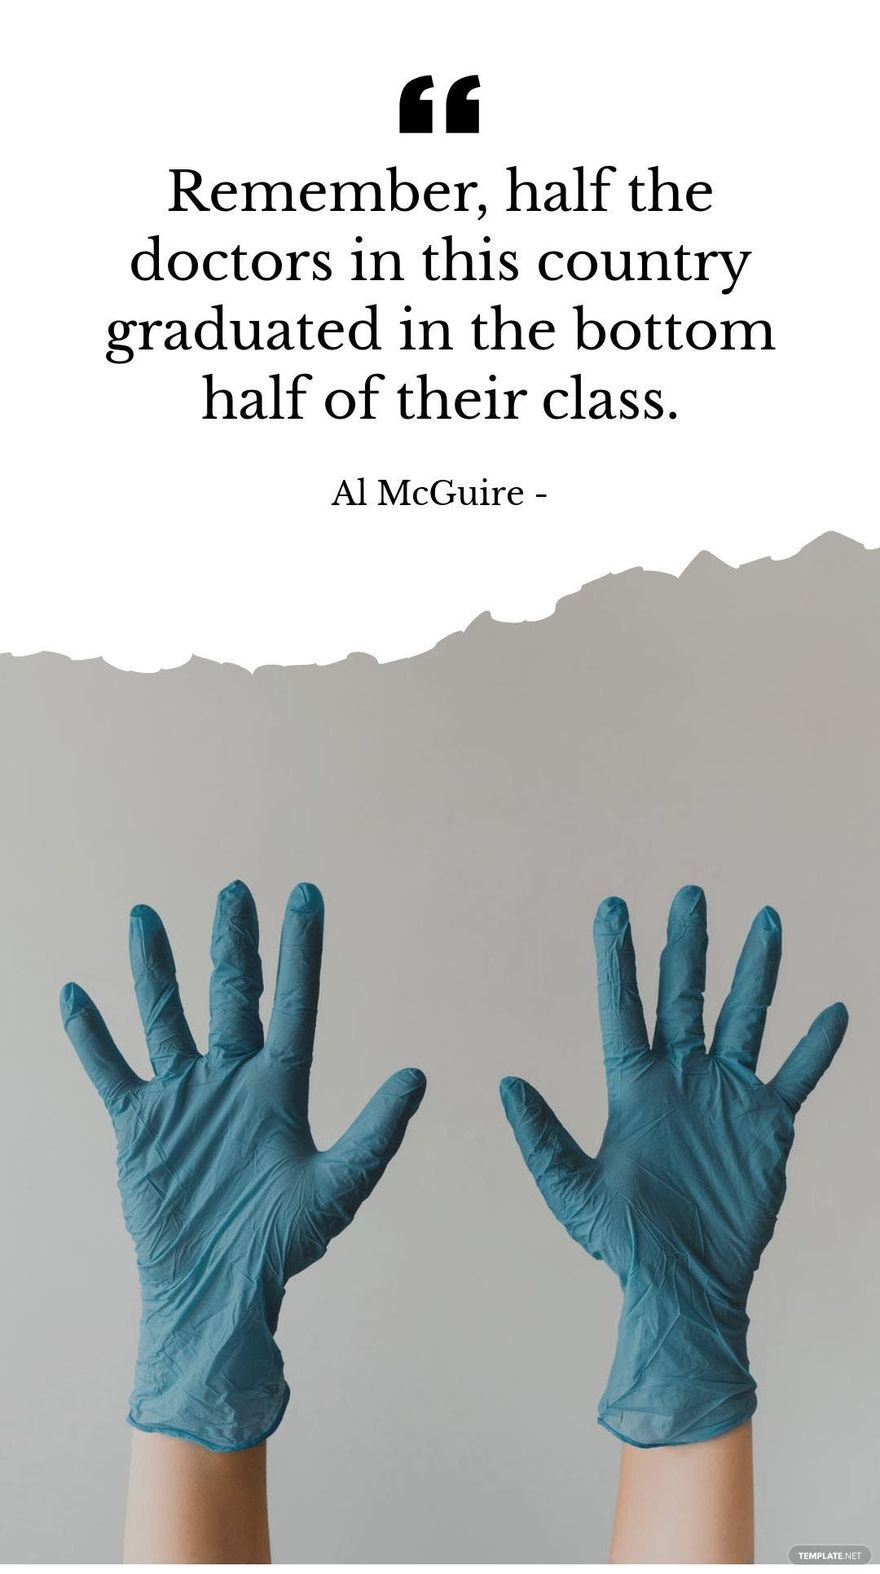 Free Al McGuire - Remember, half the doctors in this country graduated in the bottom half of their class. in JPG